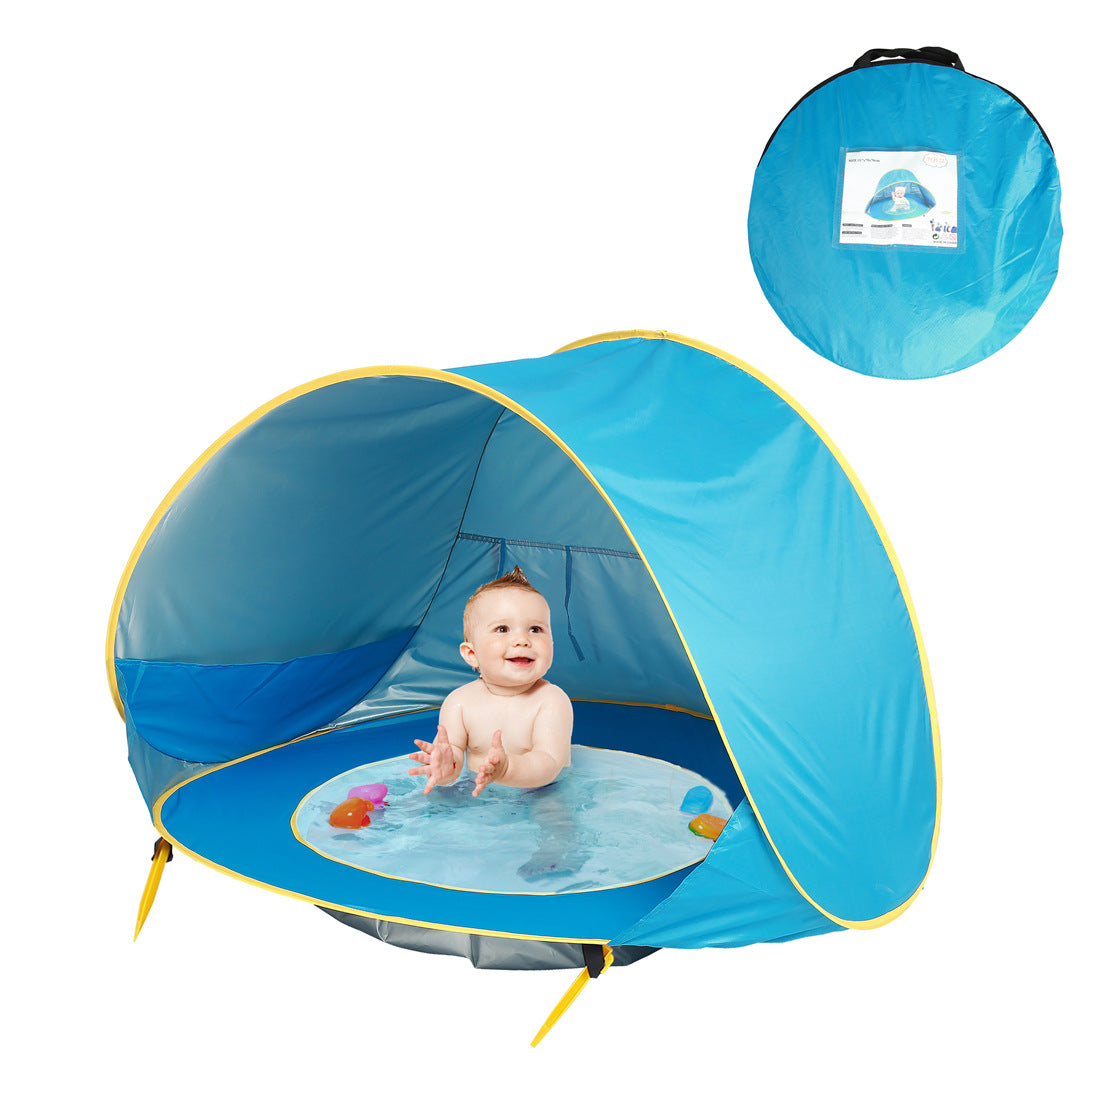 Baby Beach Tent Kids Outdoor Camping Easy Fold Up Waterproof  Up Sun Awning Tent UV-protecting